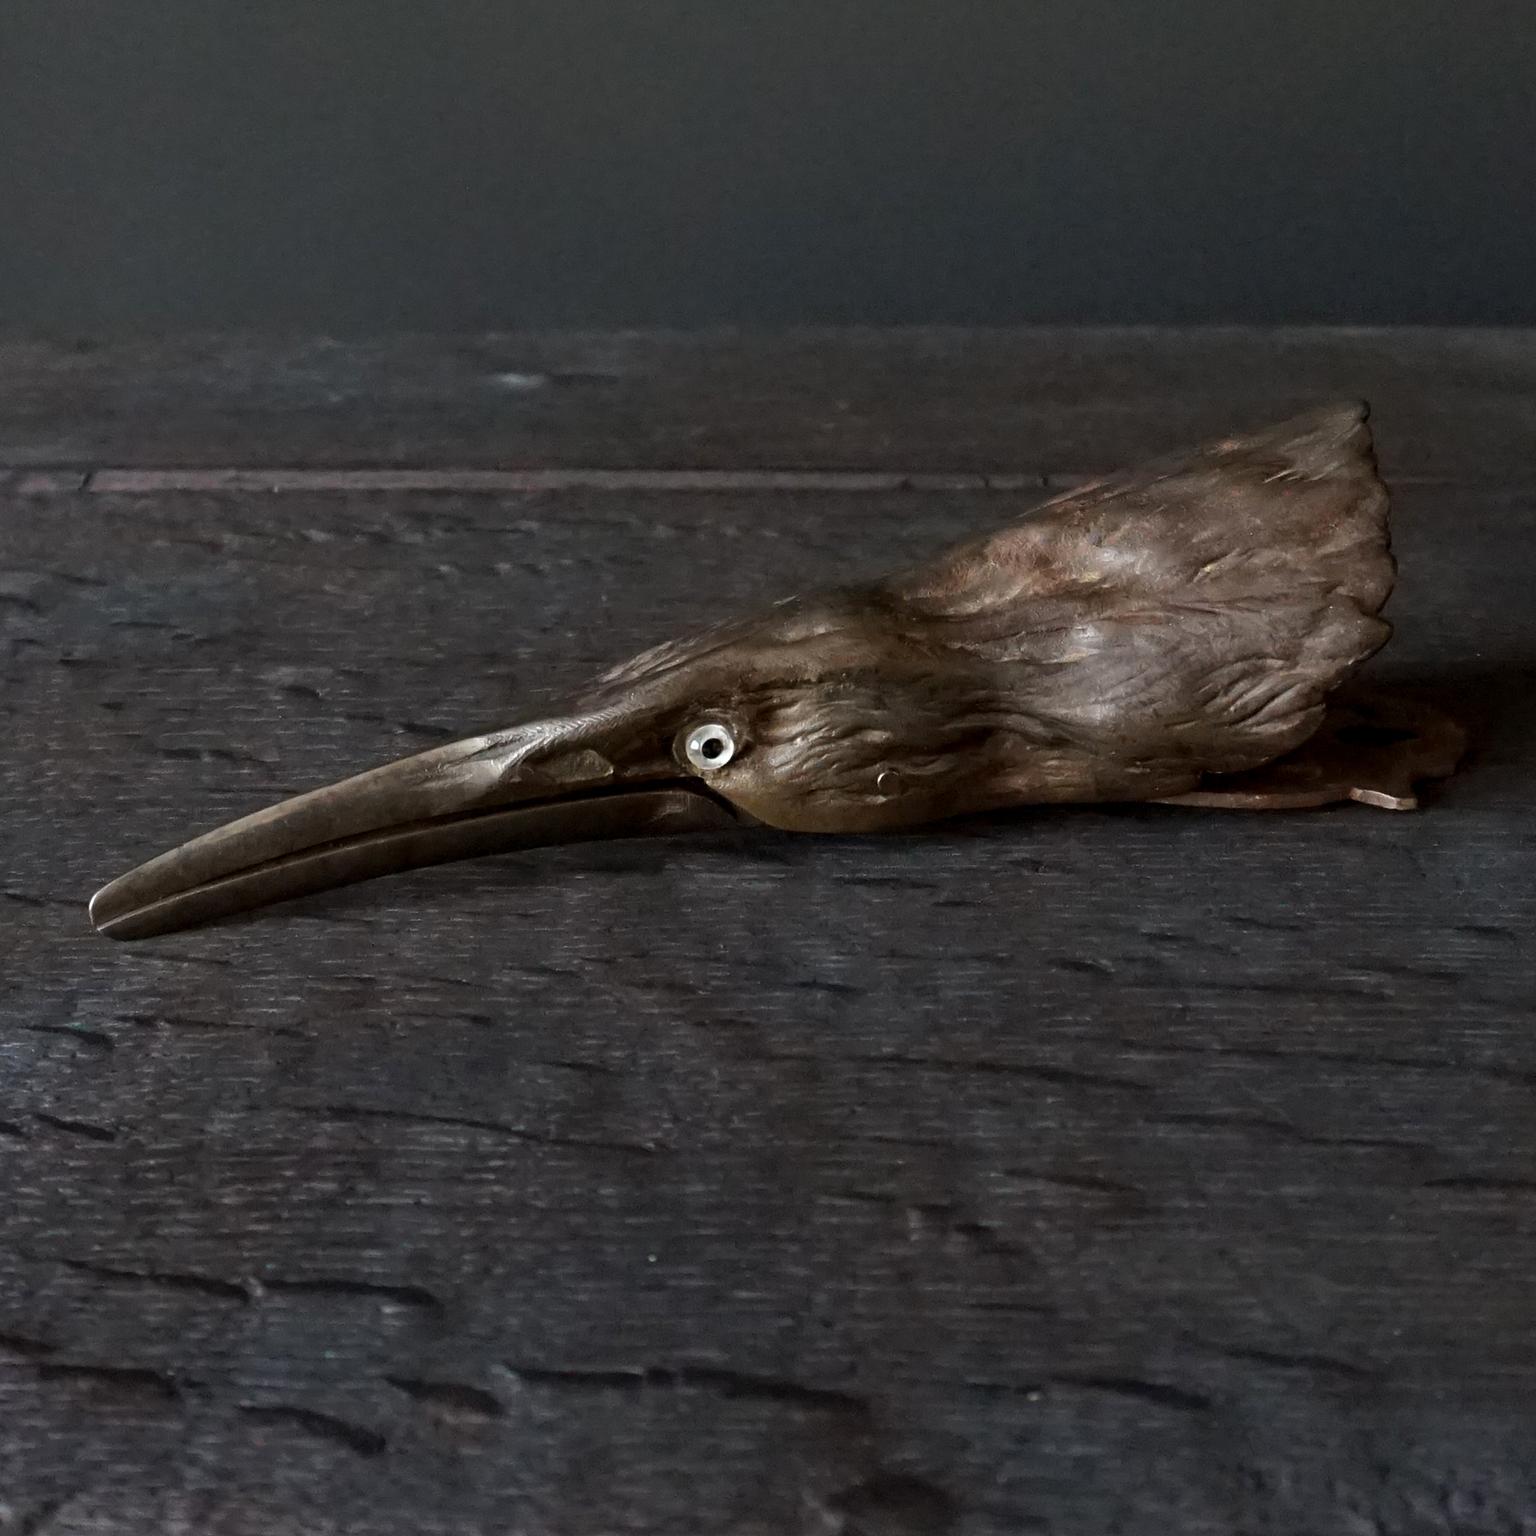 Rare 19th century French heavy cast iron clip with spring in the shape of a birds head. 
Most likely a heron, the hinge in its 'jaw joint' makes its beak act as a clip.
You pinch the back and its feathered neck to open the beak.
So this pretty